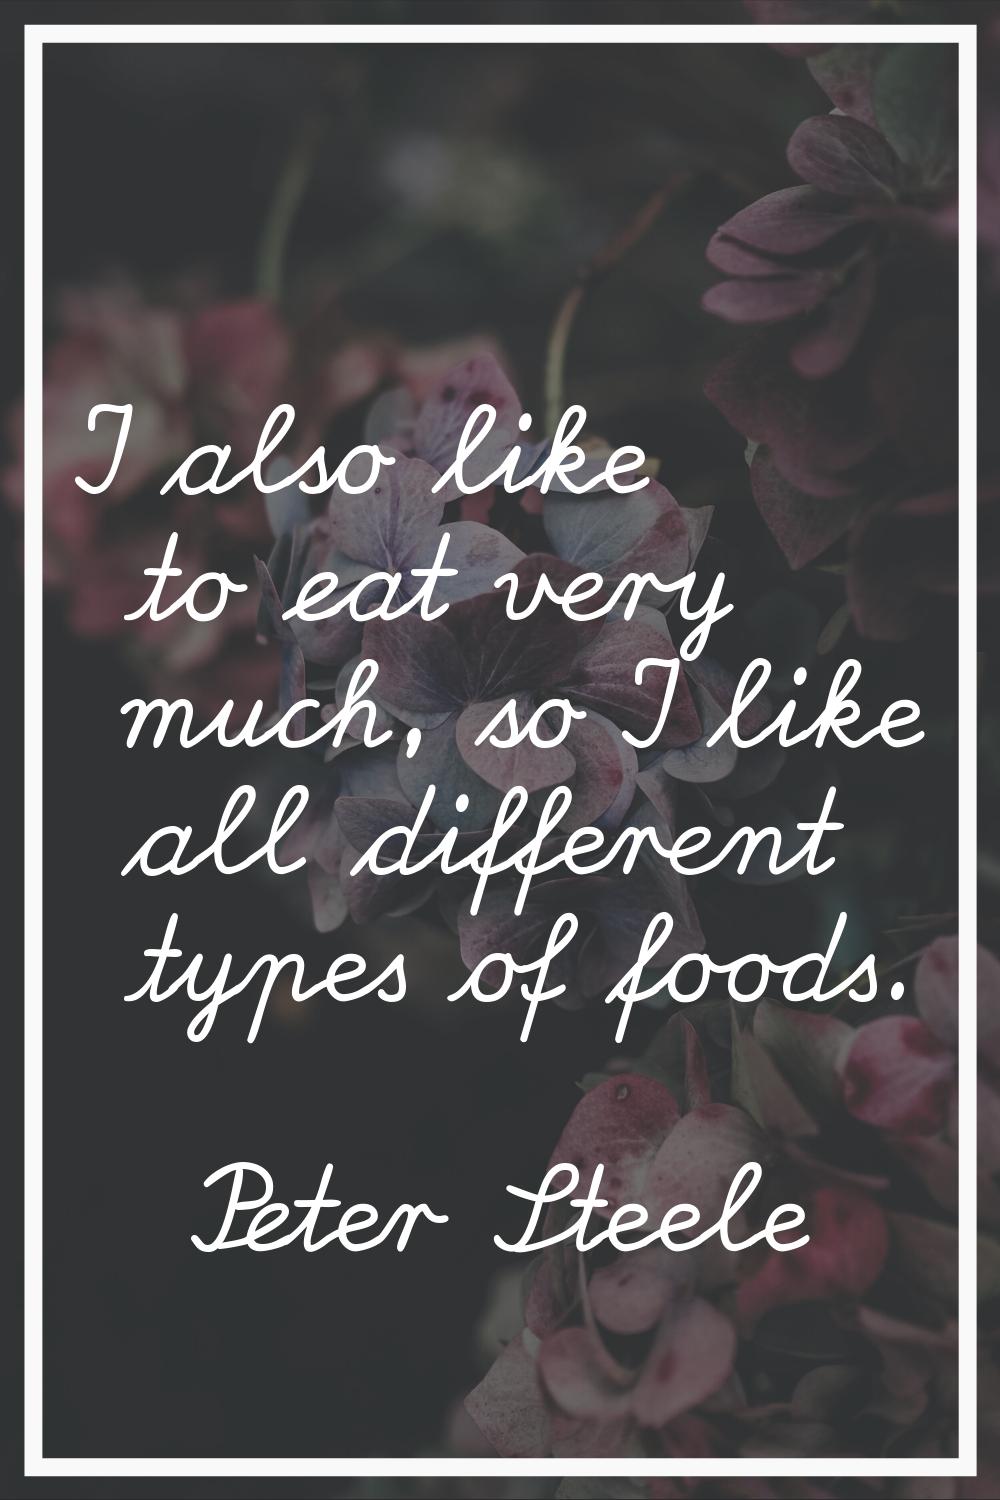 I also like to eat very much, so I like all different types of foods.